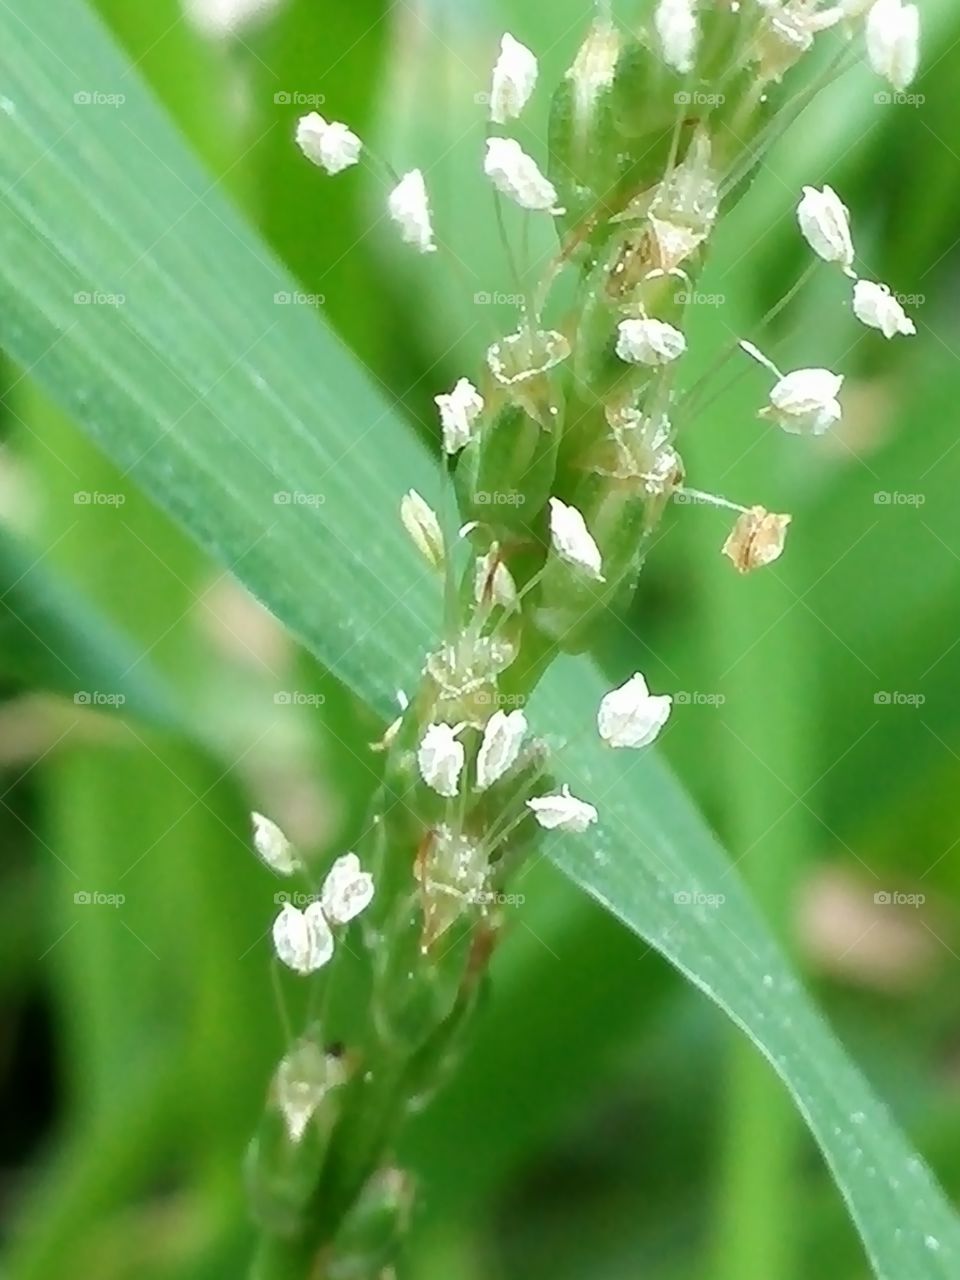 Tiny flowers of a weed